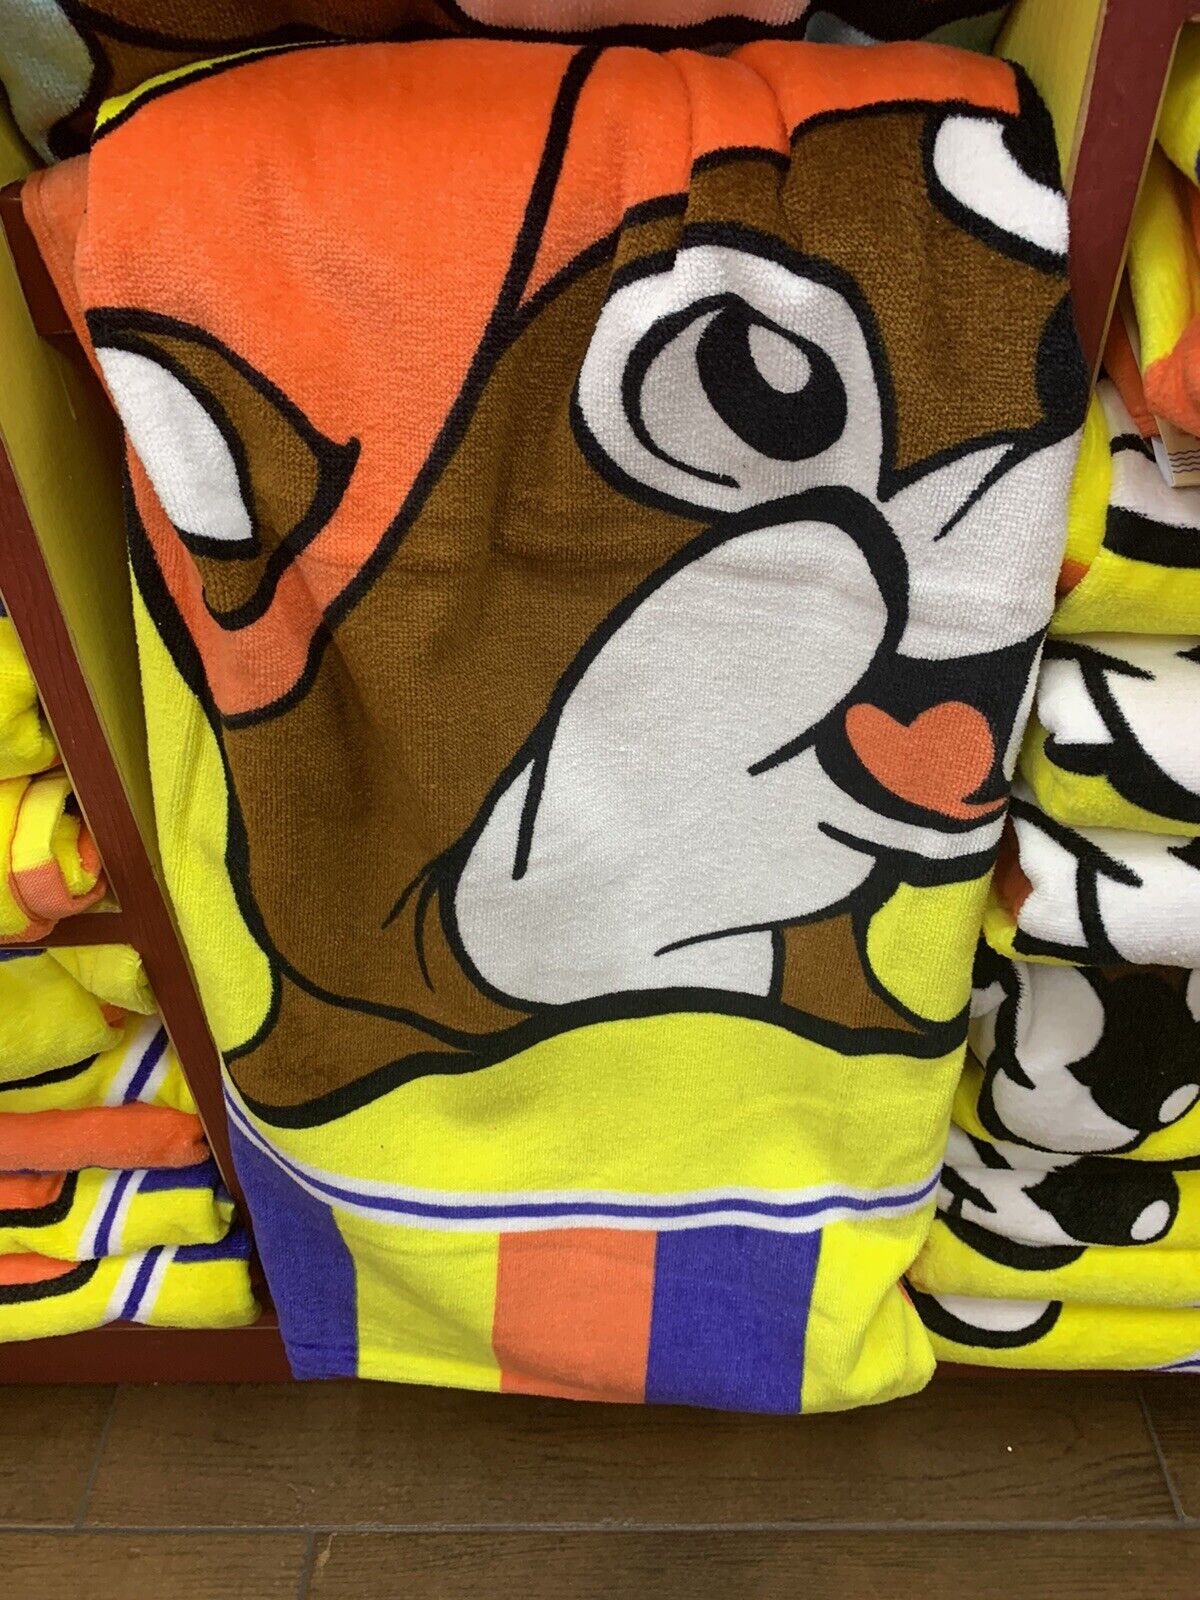 Buc-ees Beach Towels Orange, Yellow And Blue 35”x70”